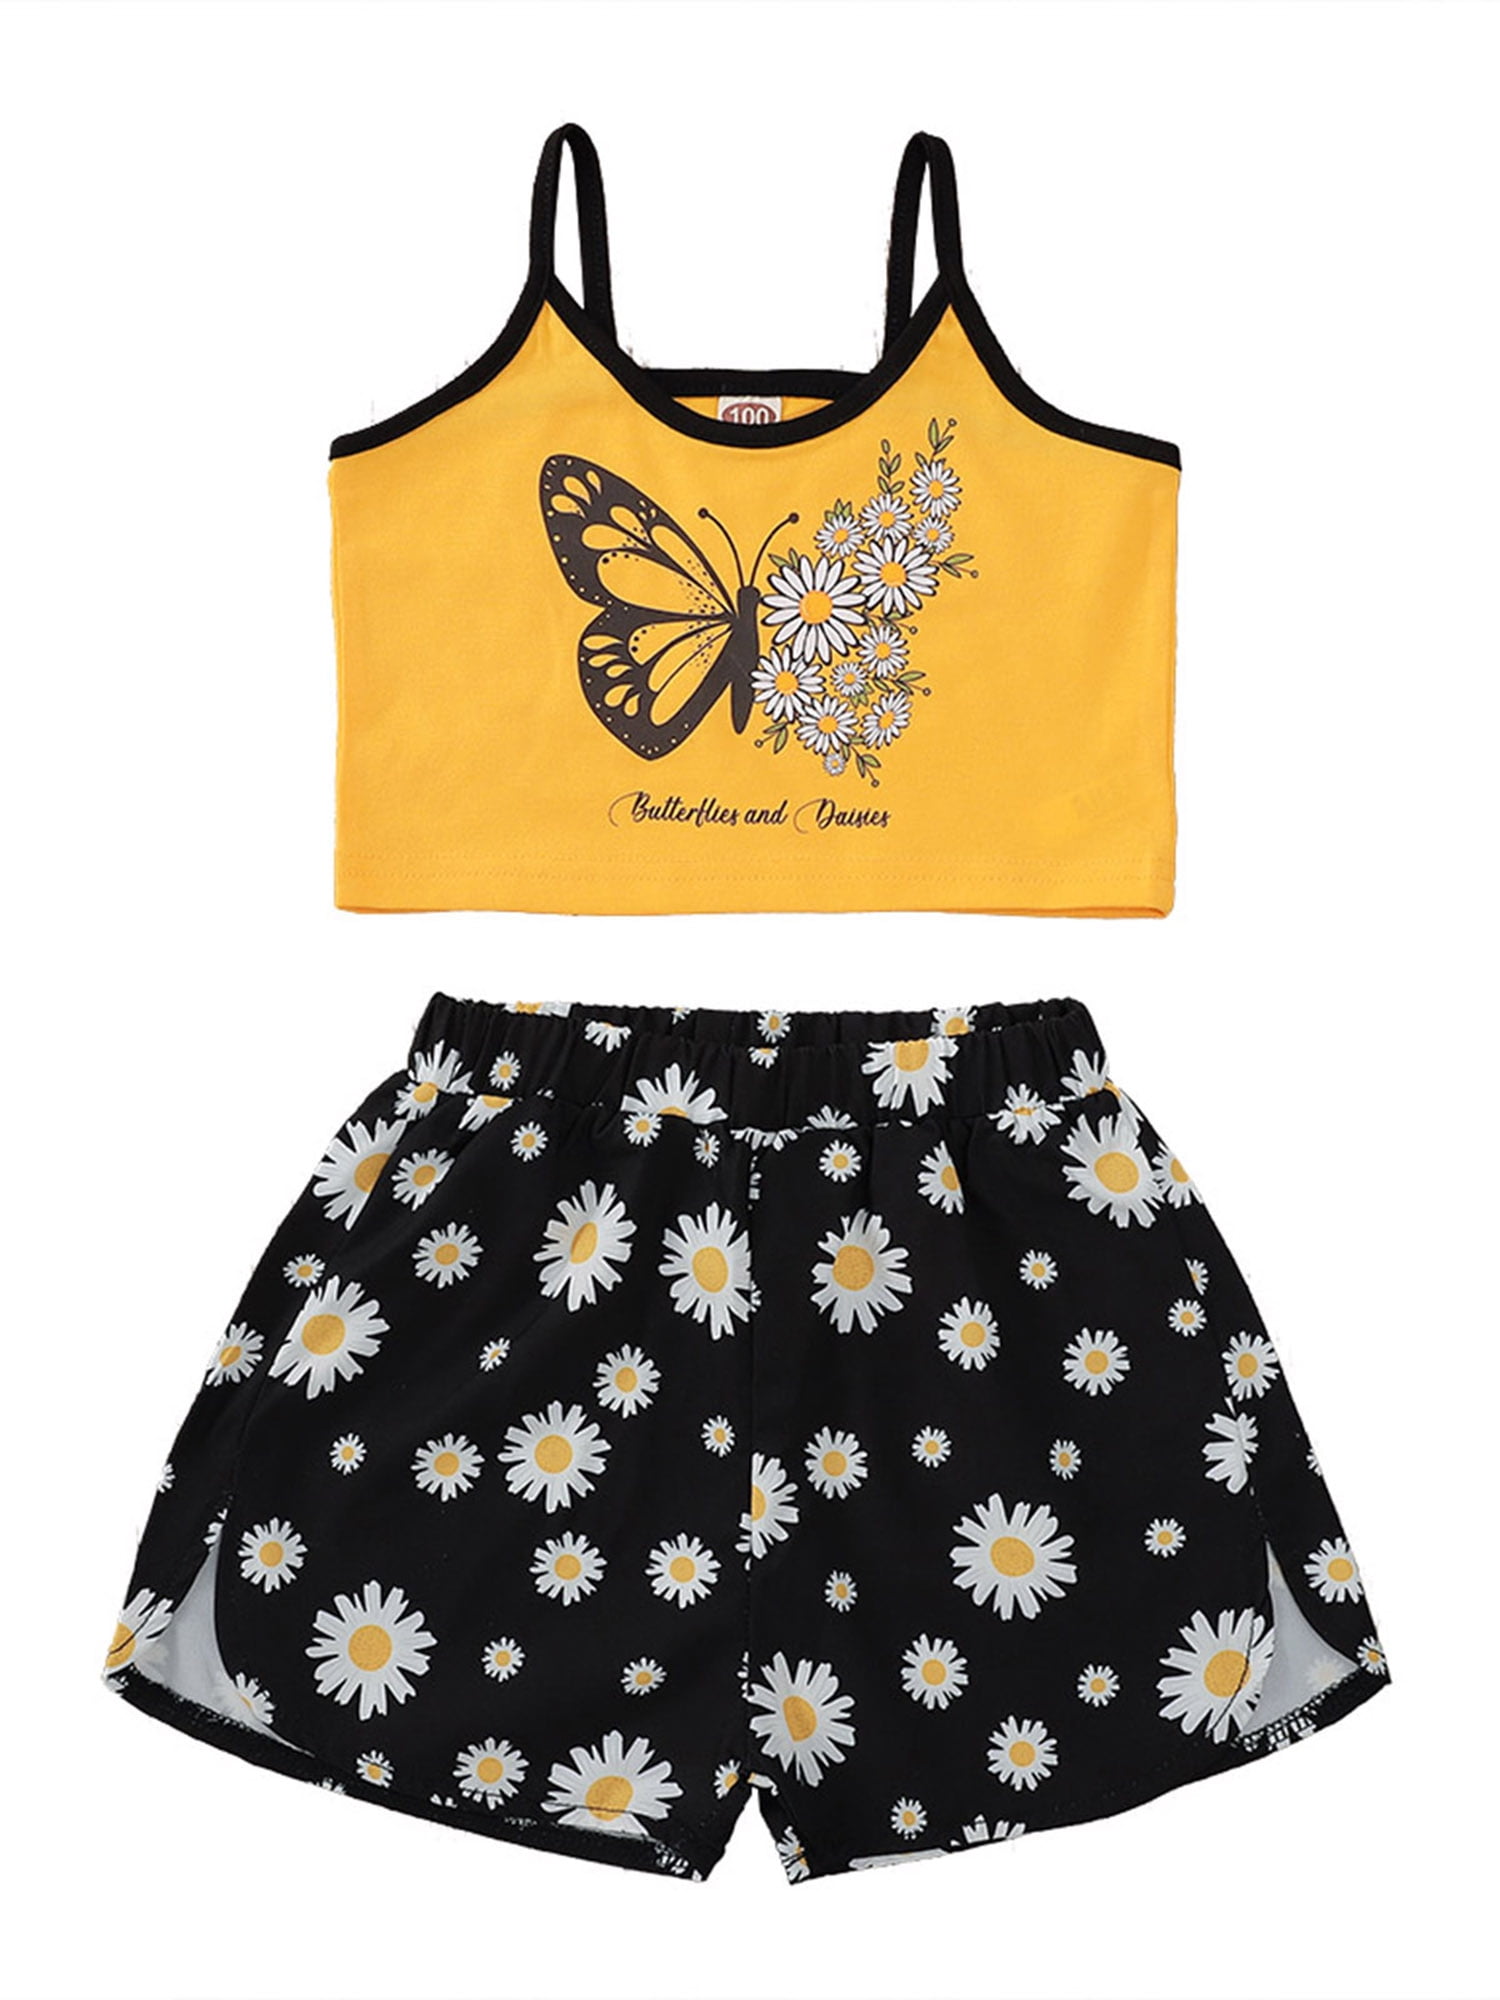 Romwe Girl's 2 Pieces Outfit Butterfly Print Crop Tops and Pant Set Clothing Set 